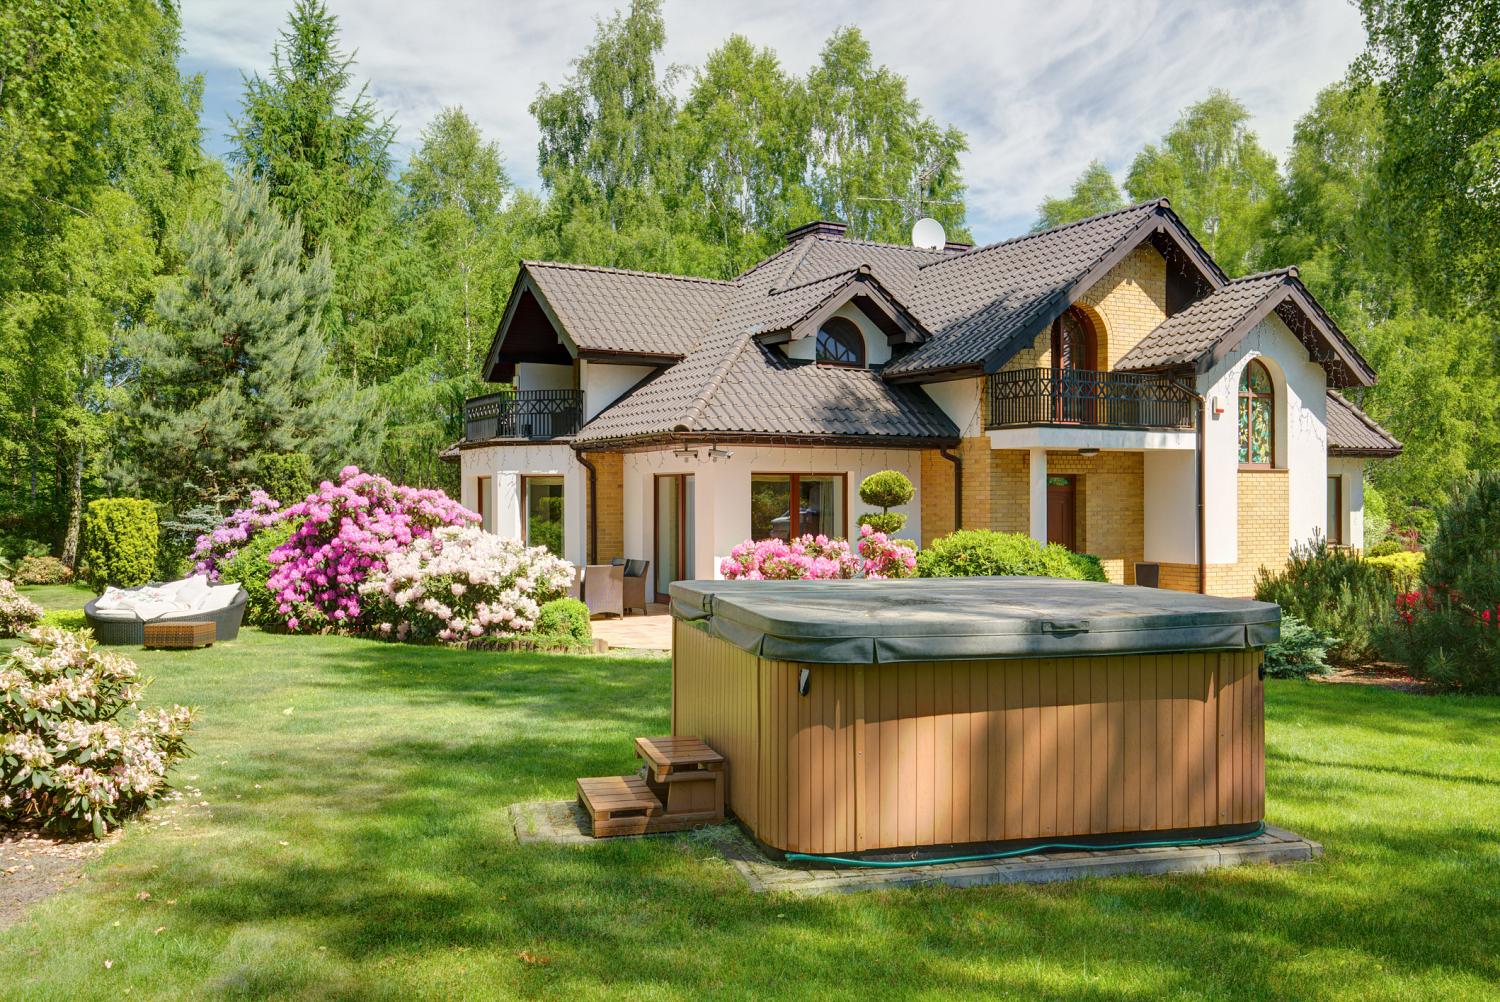 Does a hot tub add value to your home?